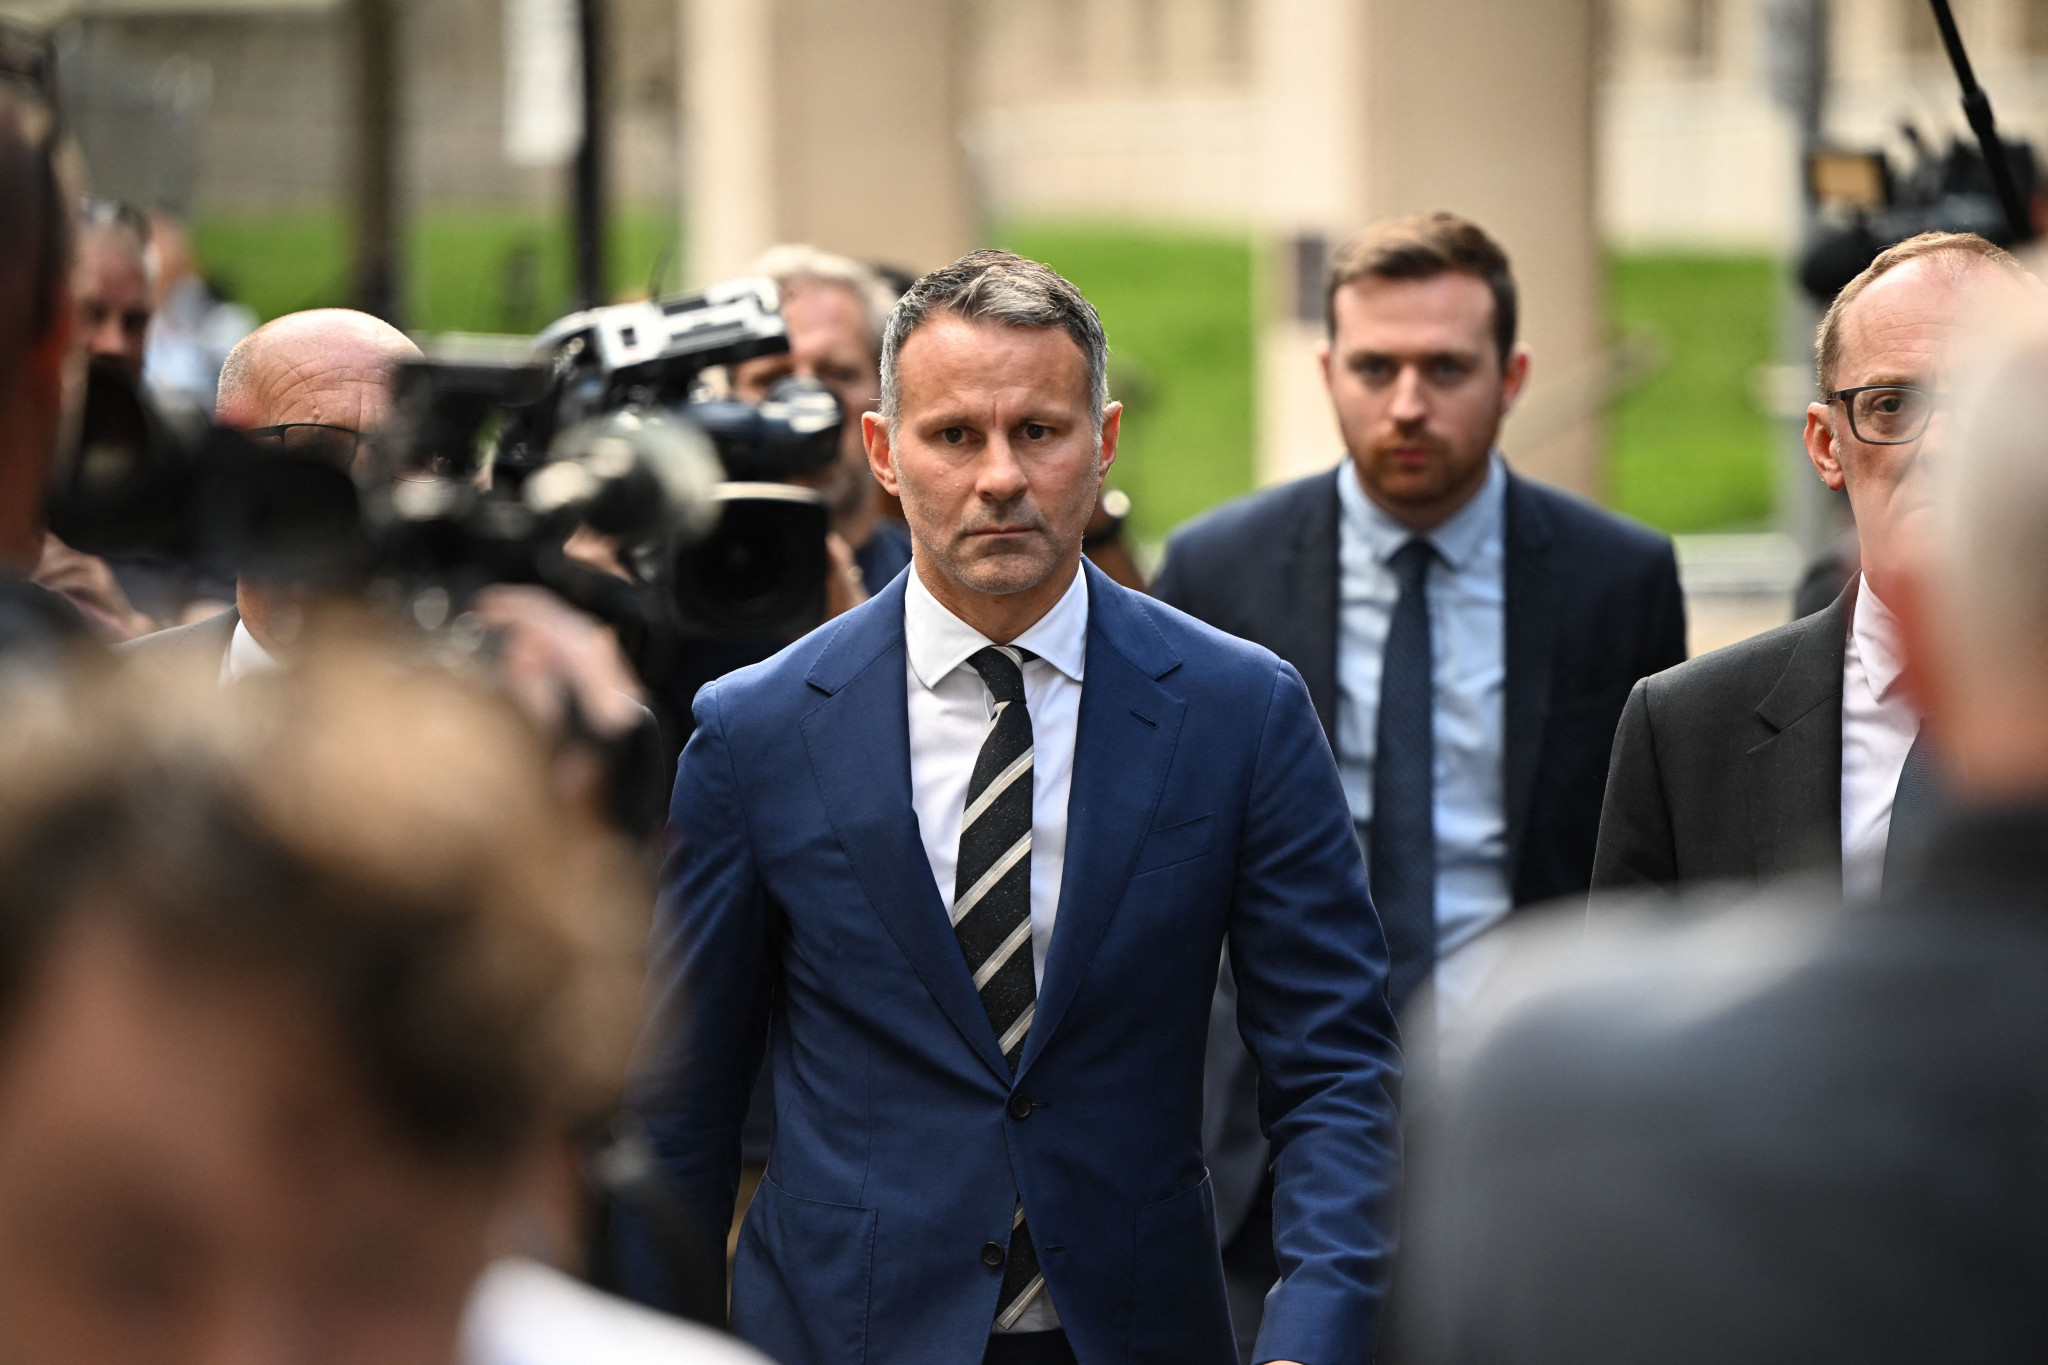 Jury in Giggs domestic abuse trial fails to reach verdict